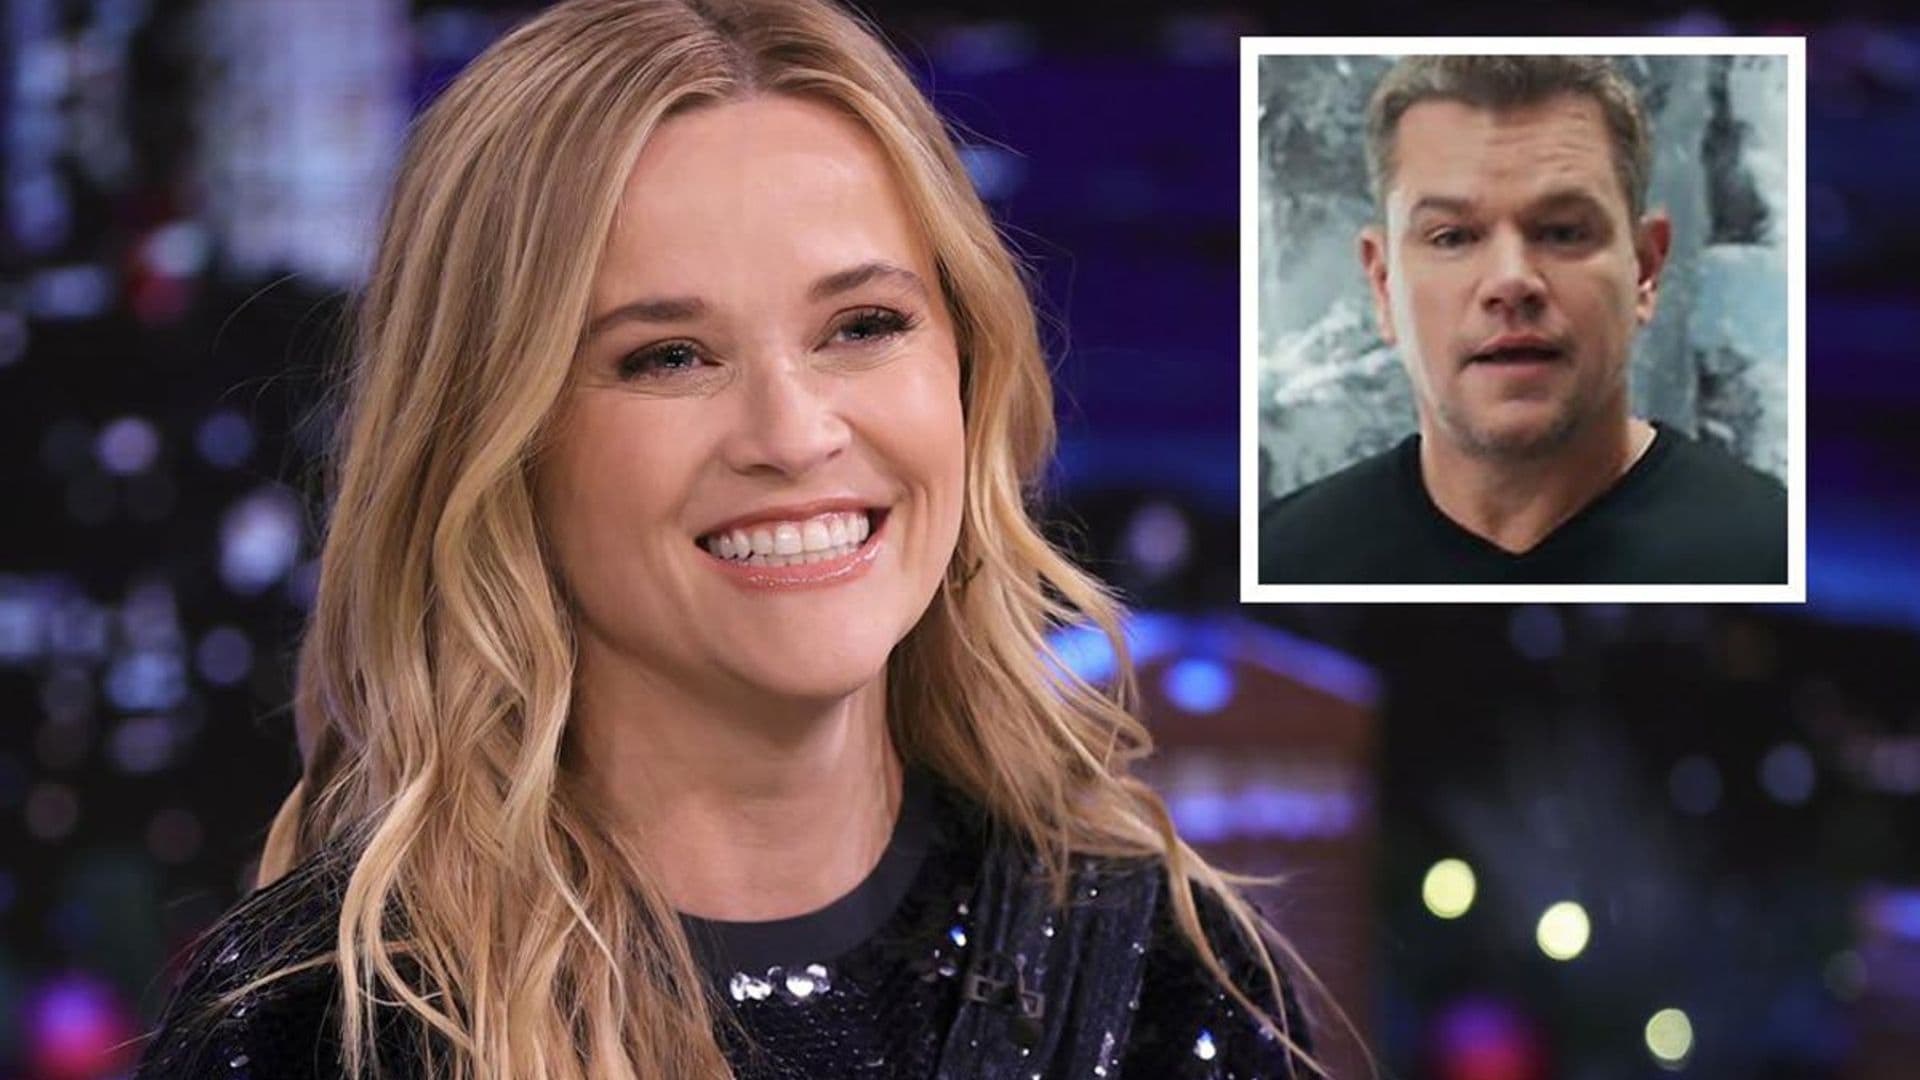 Reese Witherspoon catches crypto backlash shortly after Matt Damon